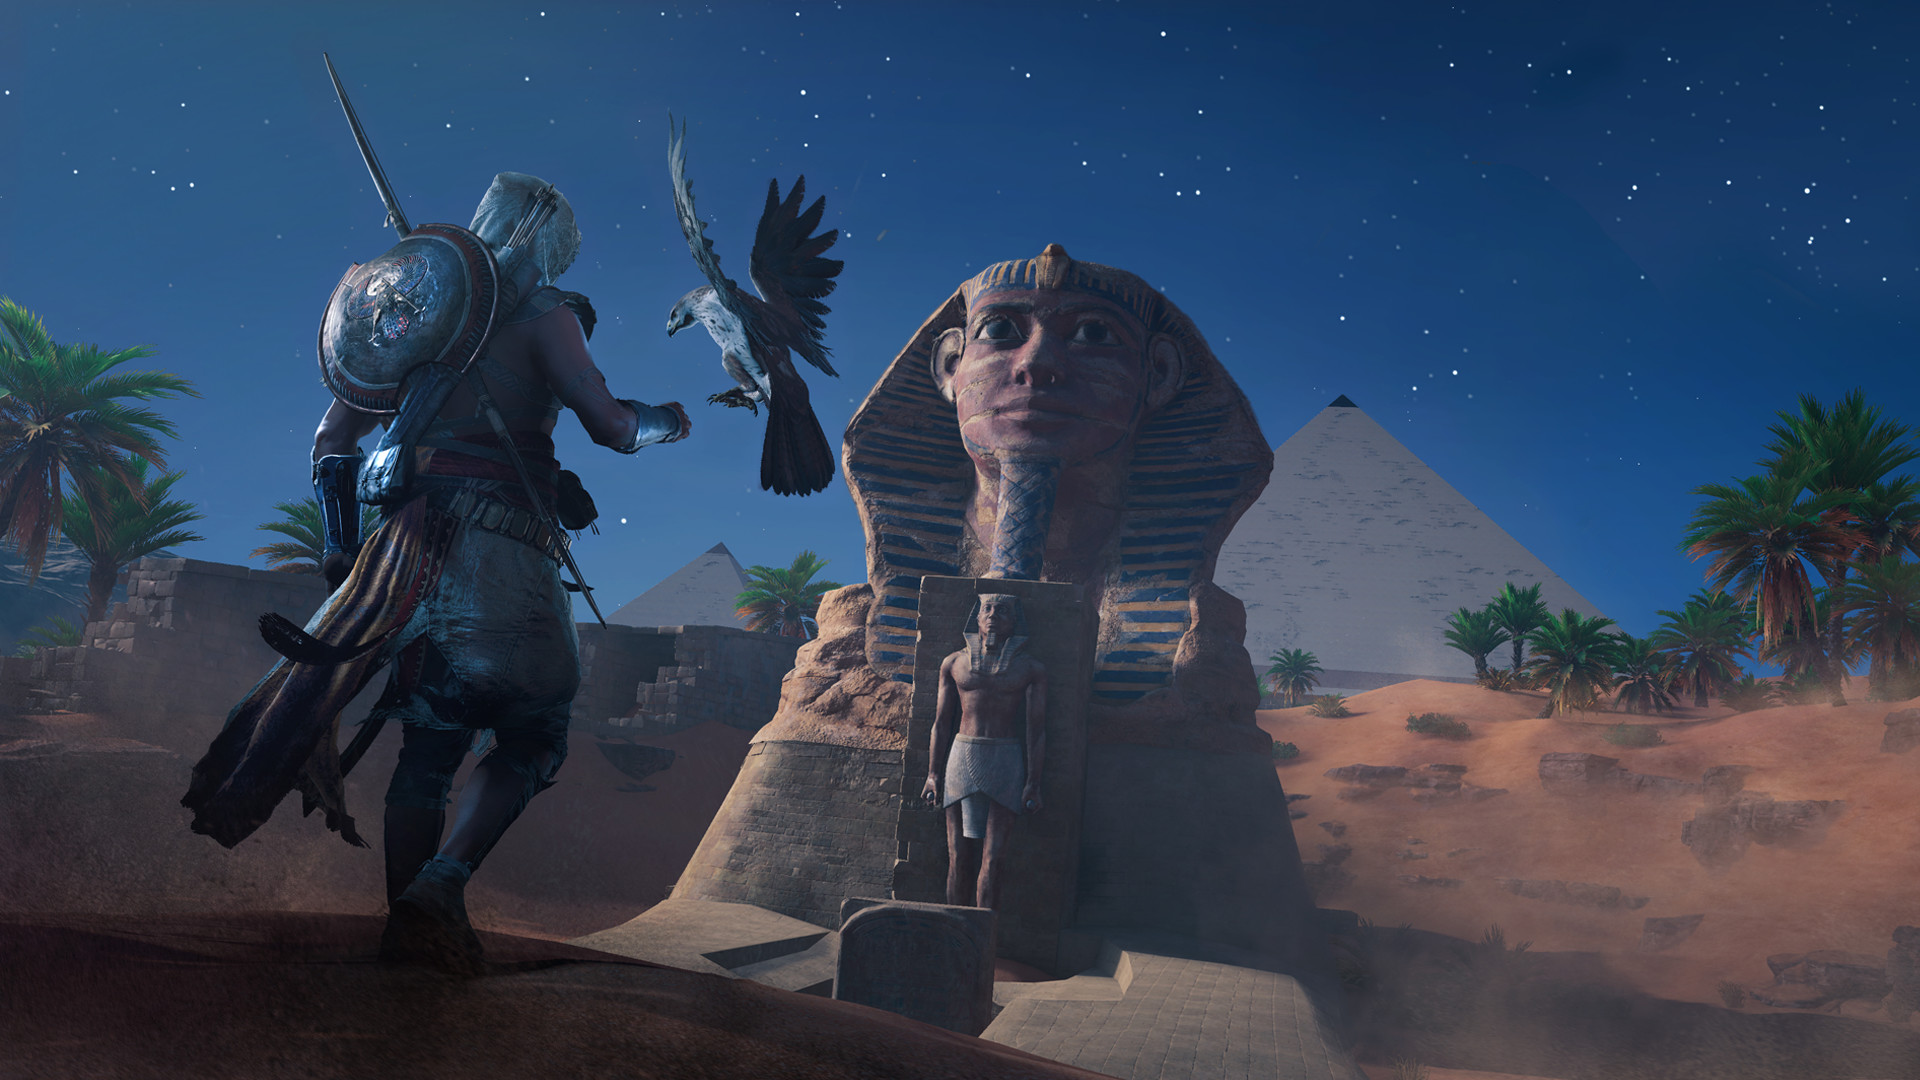 Save 80% on Assassin's Creed® Origins on Steam